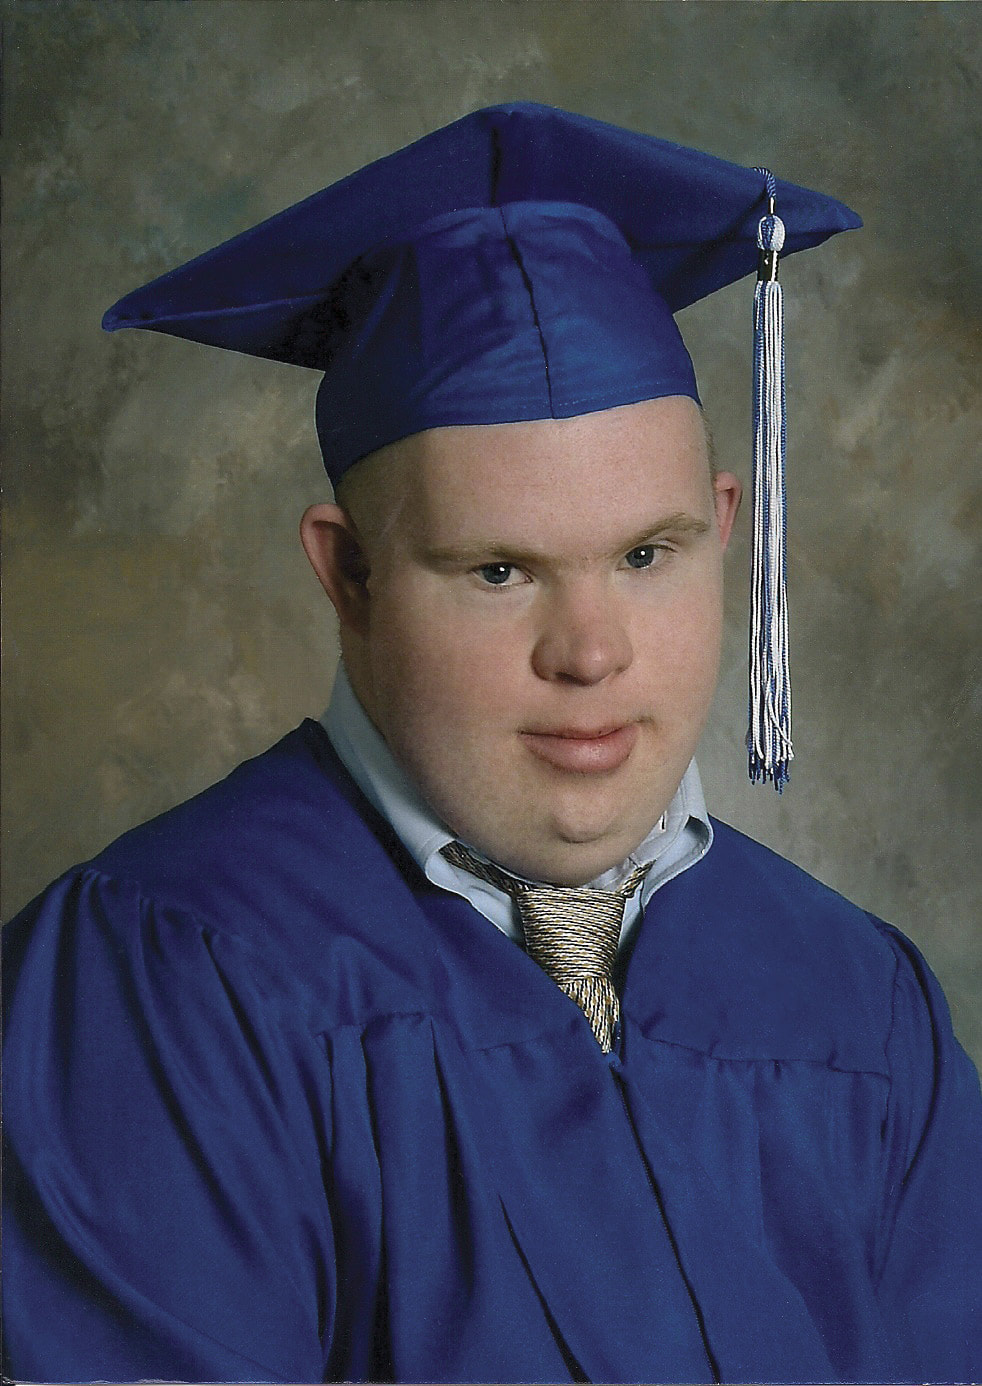 A graduation headshot of Ethan Saylor, a young man with Down syndrome who wears a blue graduation gown and cap.